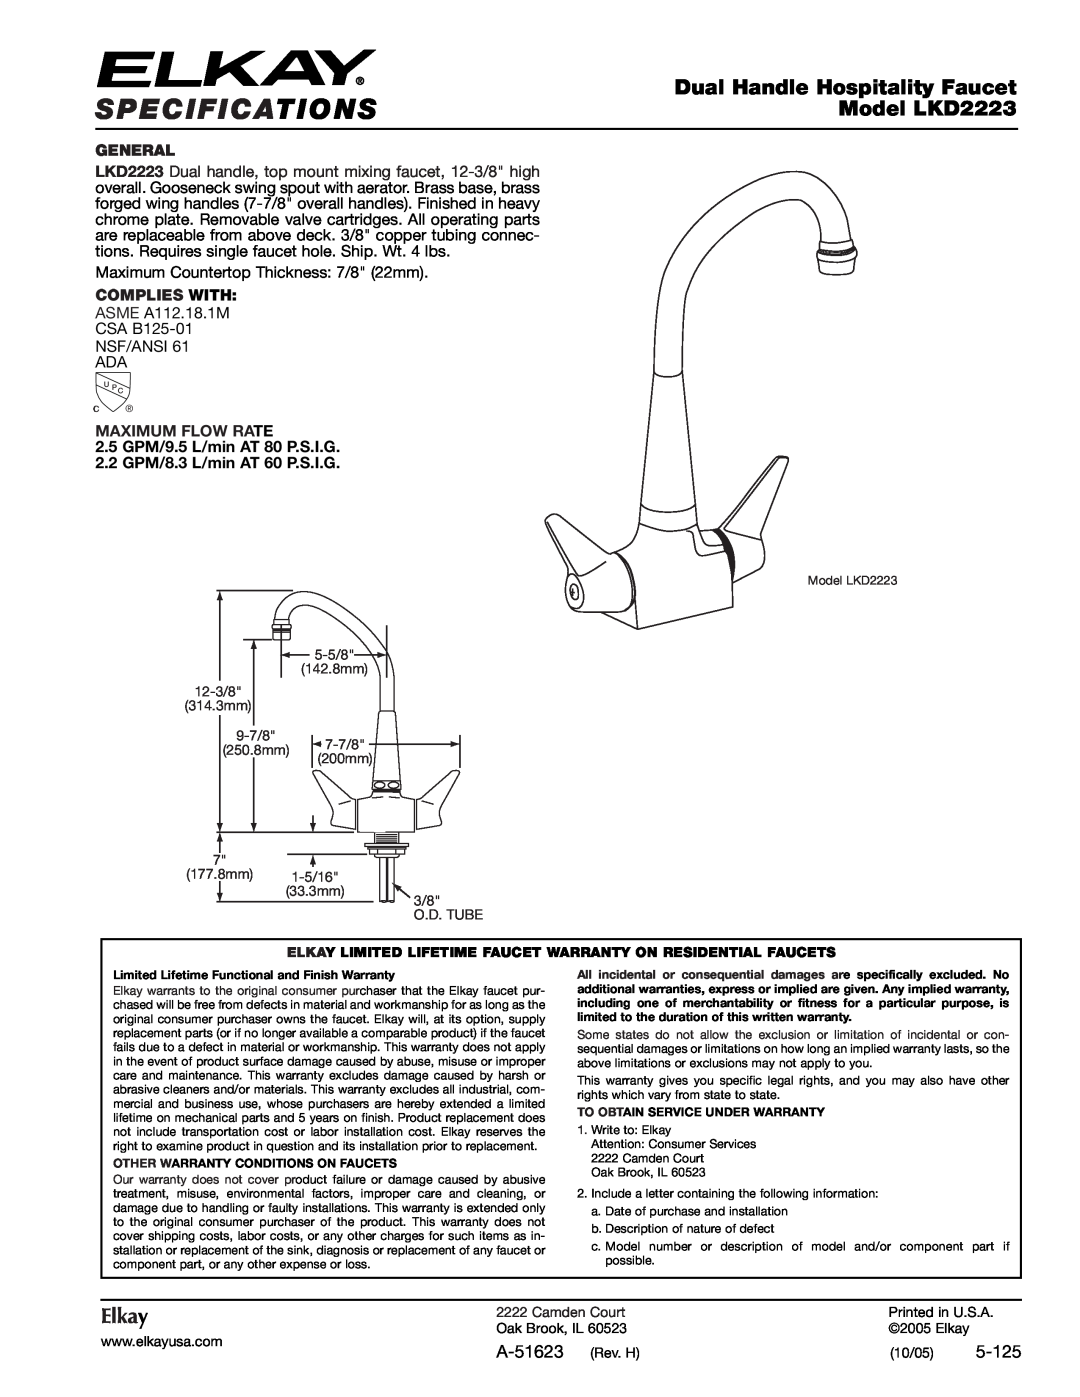 Elkay specifications Specifications, Dual Handle Hospitality Faucet, Model LKD2223, Elkay, A-51623 Rev. H, 5-125 